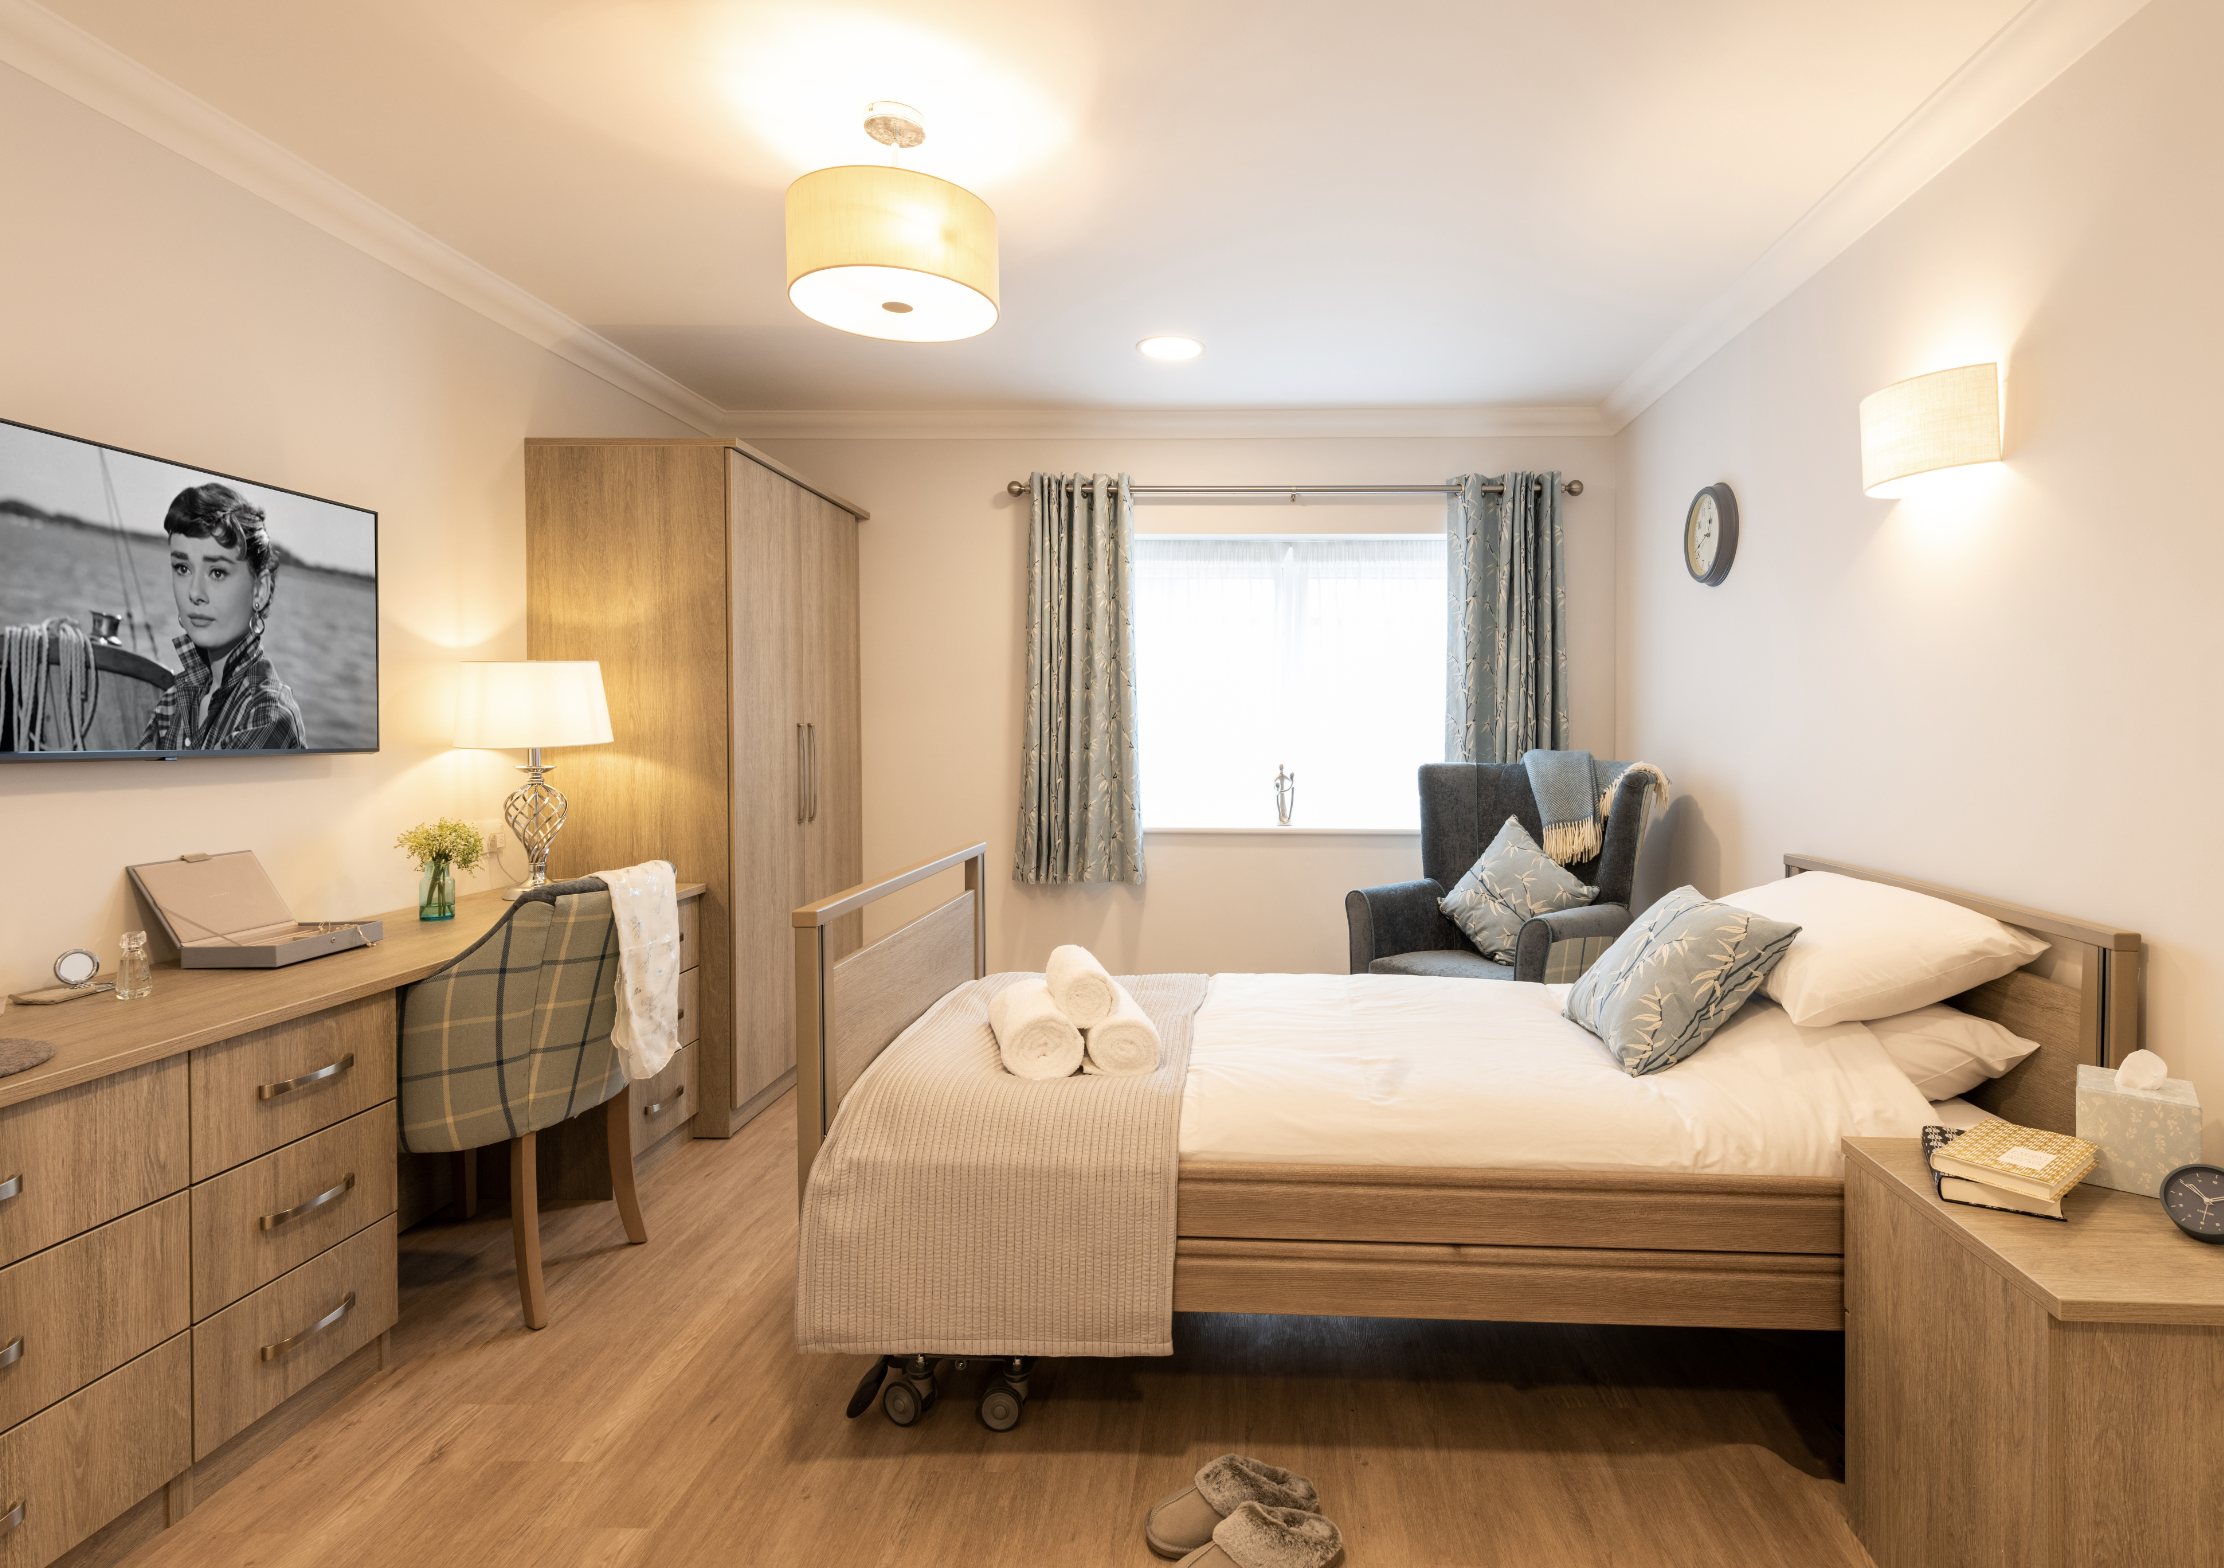 Bedroom of Chestnut Manor care home in Wanstead, London